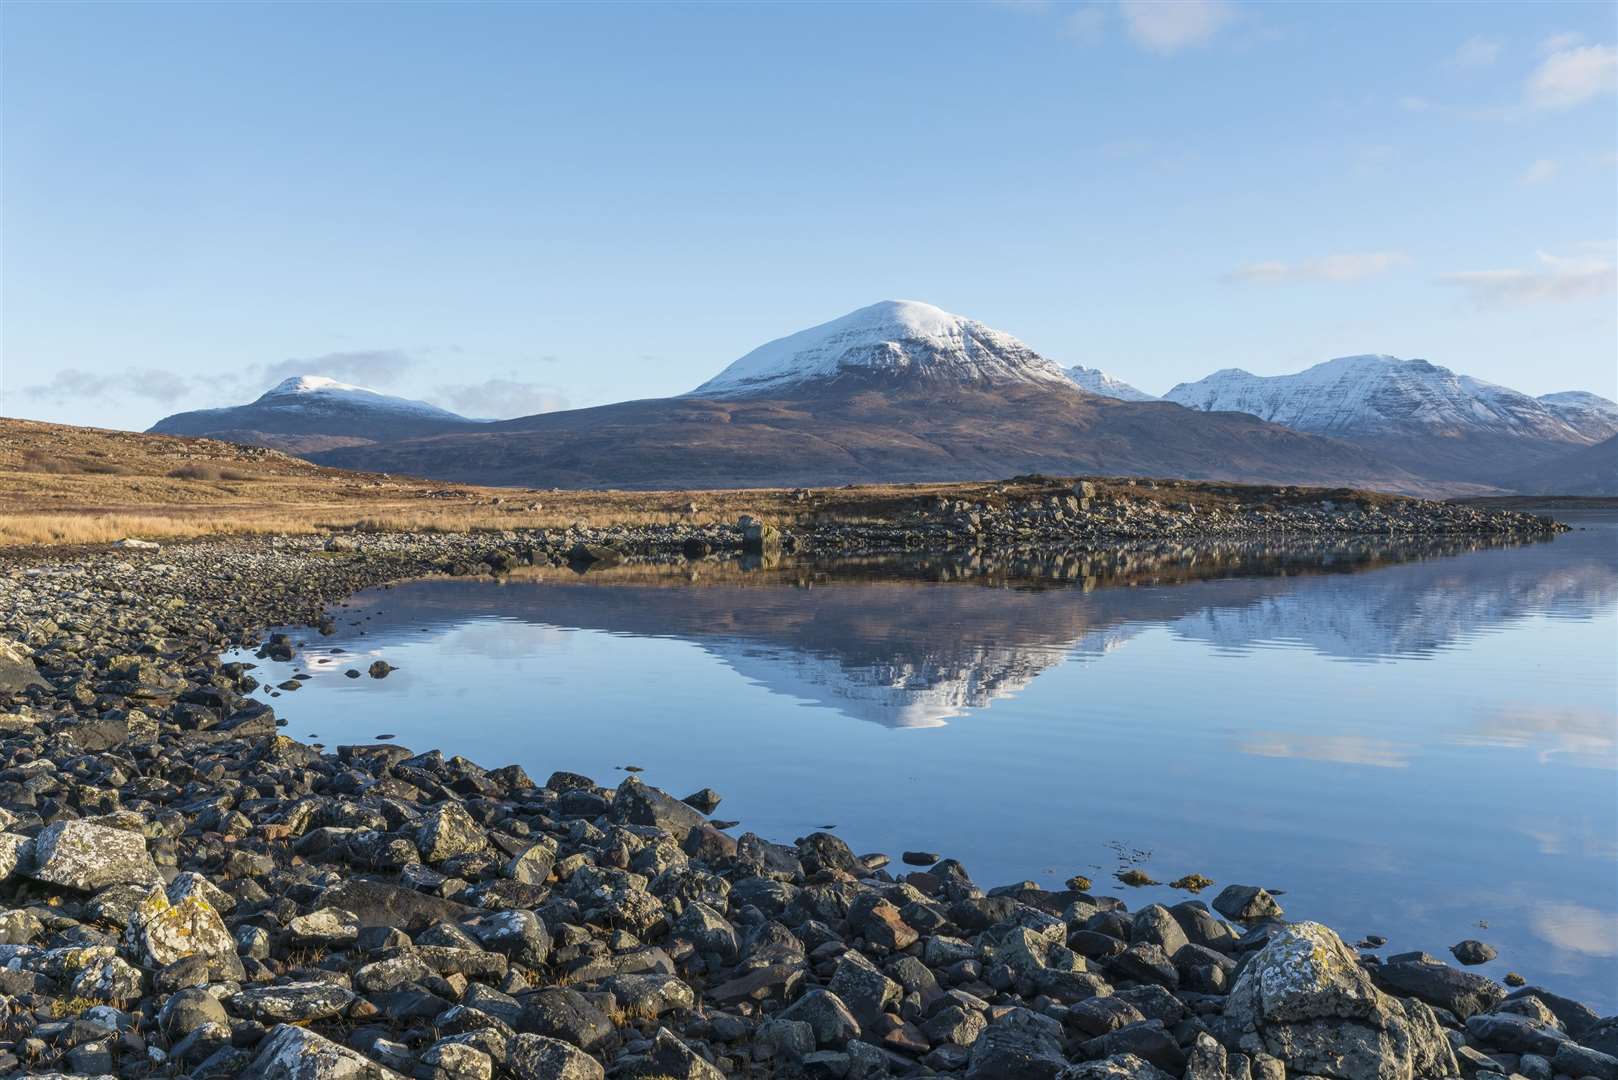 The Torridon landscape reflected in Upper Loch Torridon. Communities around Torridon and Applecross have been reporting irresponsible behaviour by some campers since lockdown restrictions eased.